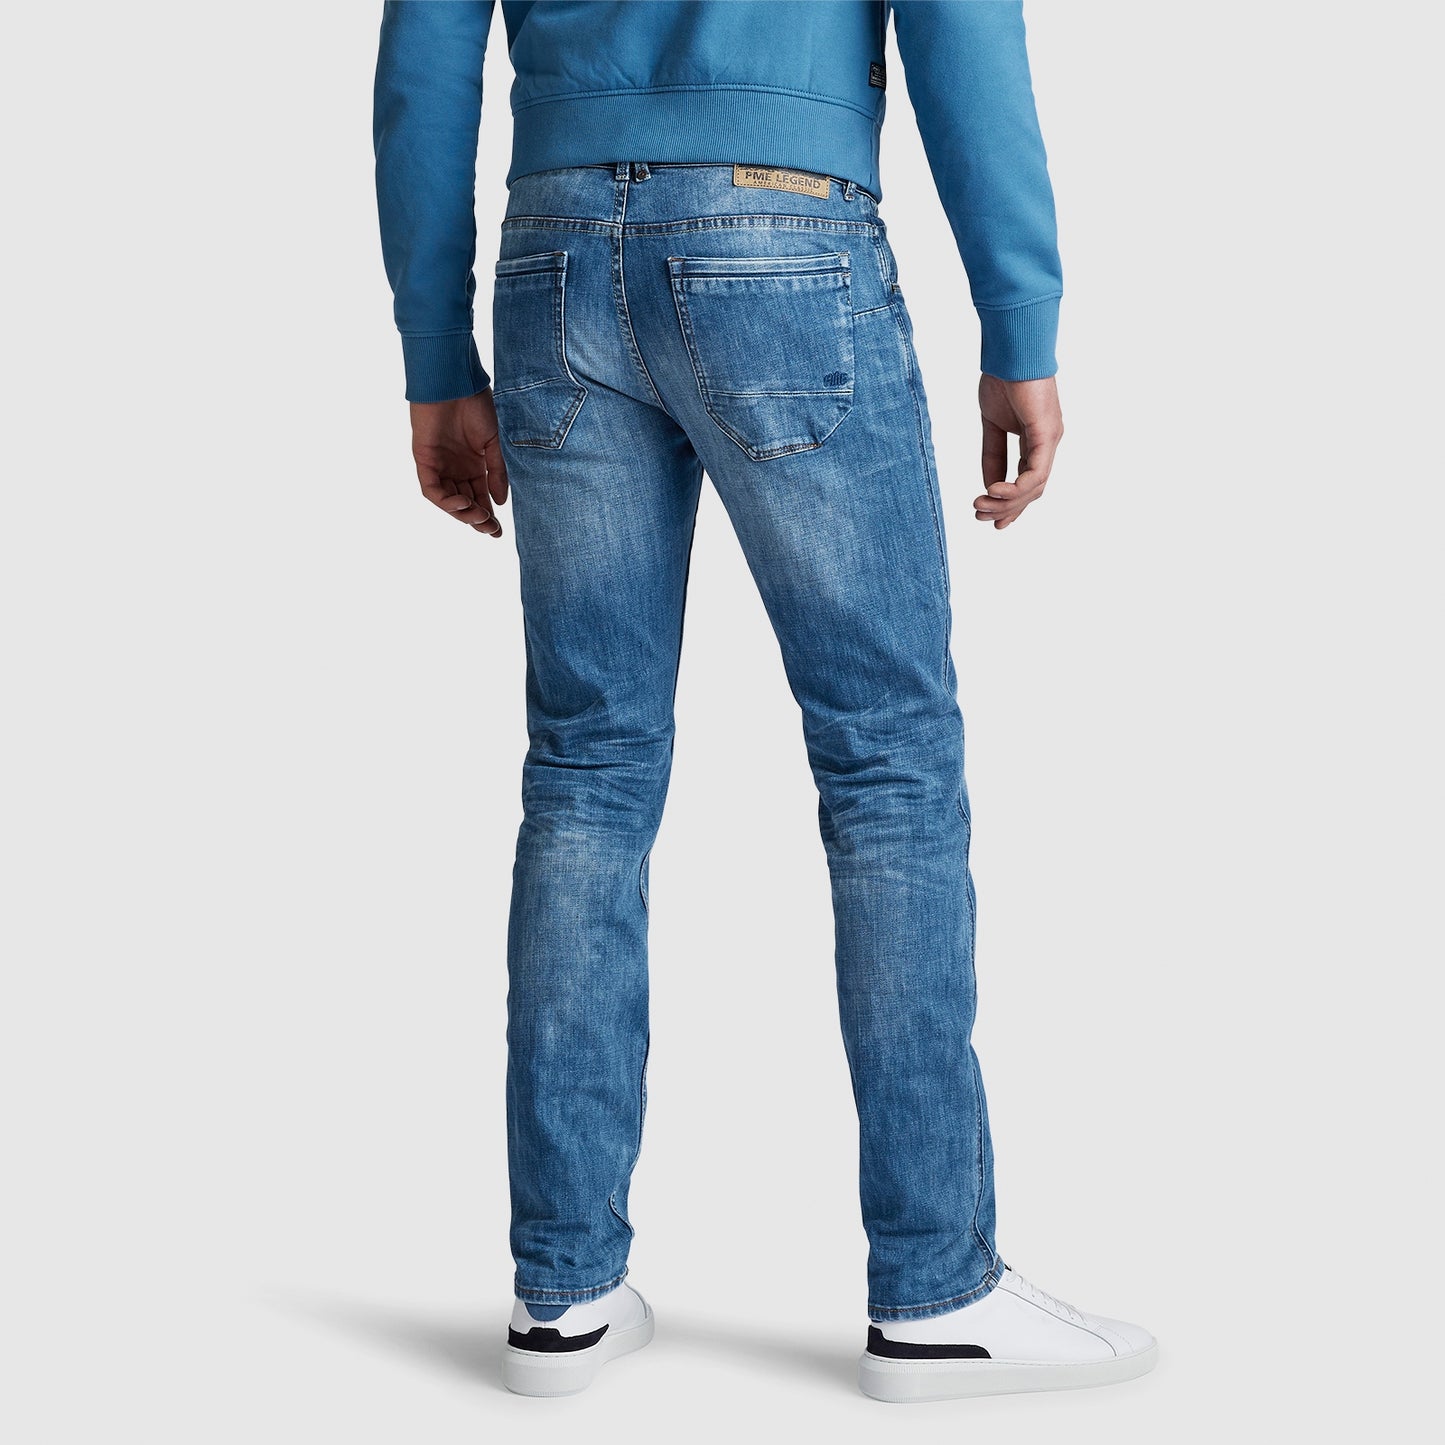 PME LEGEND NIGHTFLIGHT JEANS Pigment Printed Dobby (Fbs)